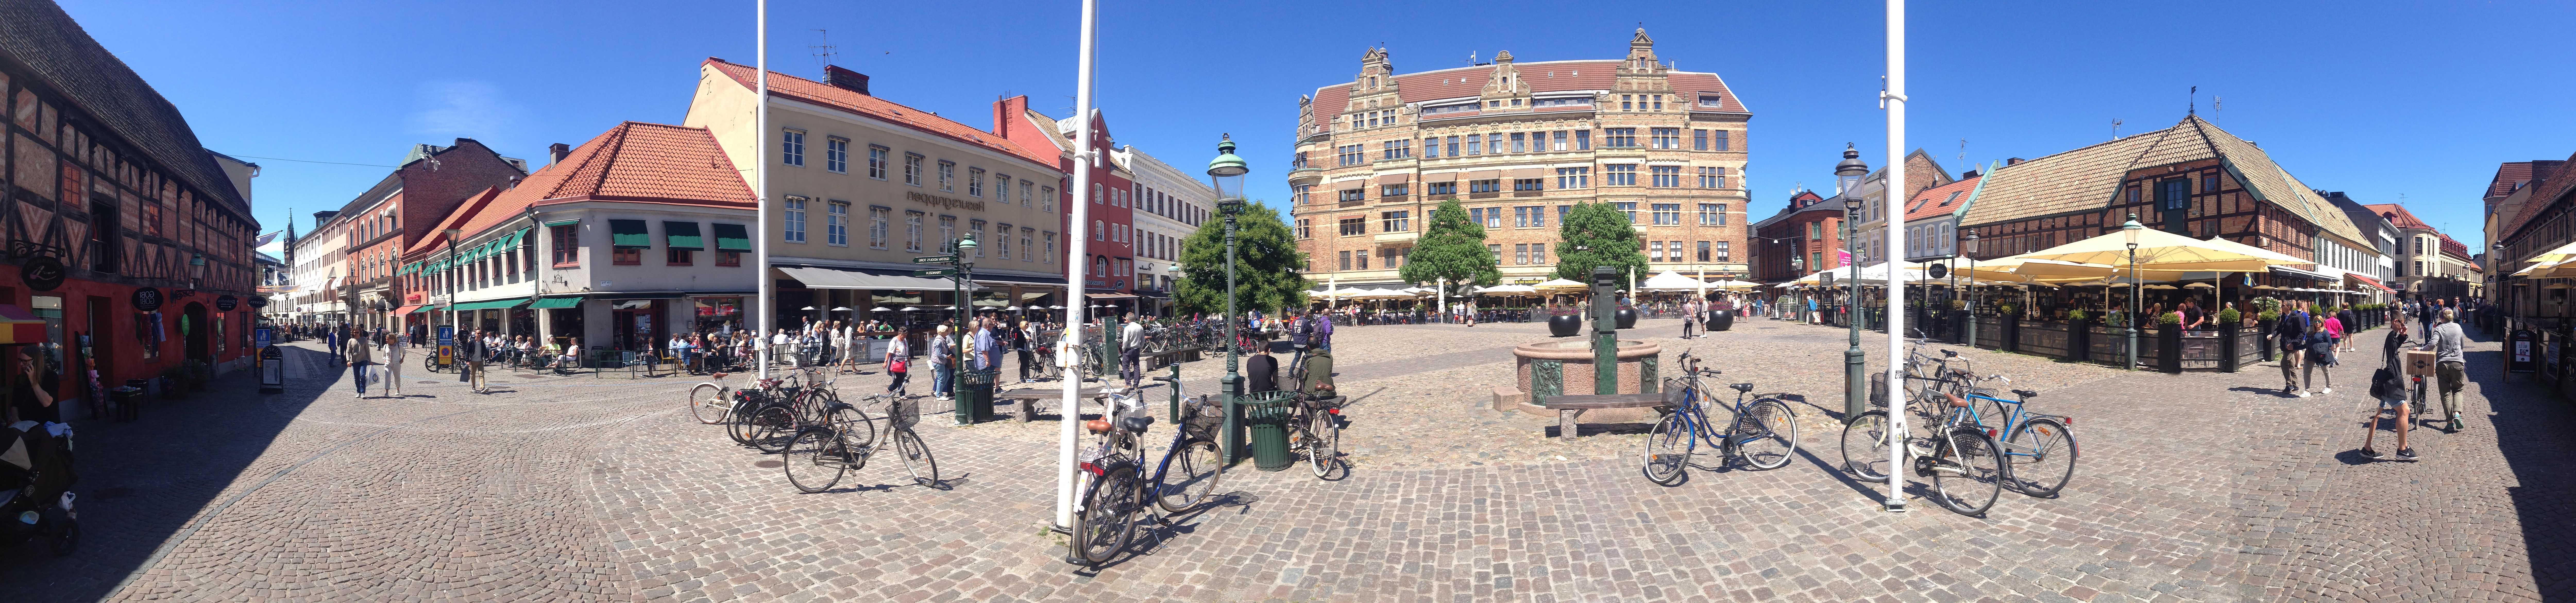 Panoramic view of city in Denmark